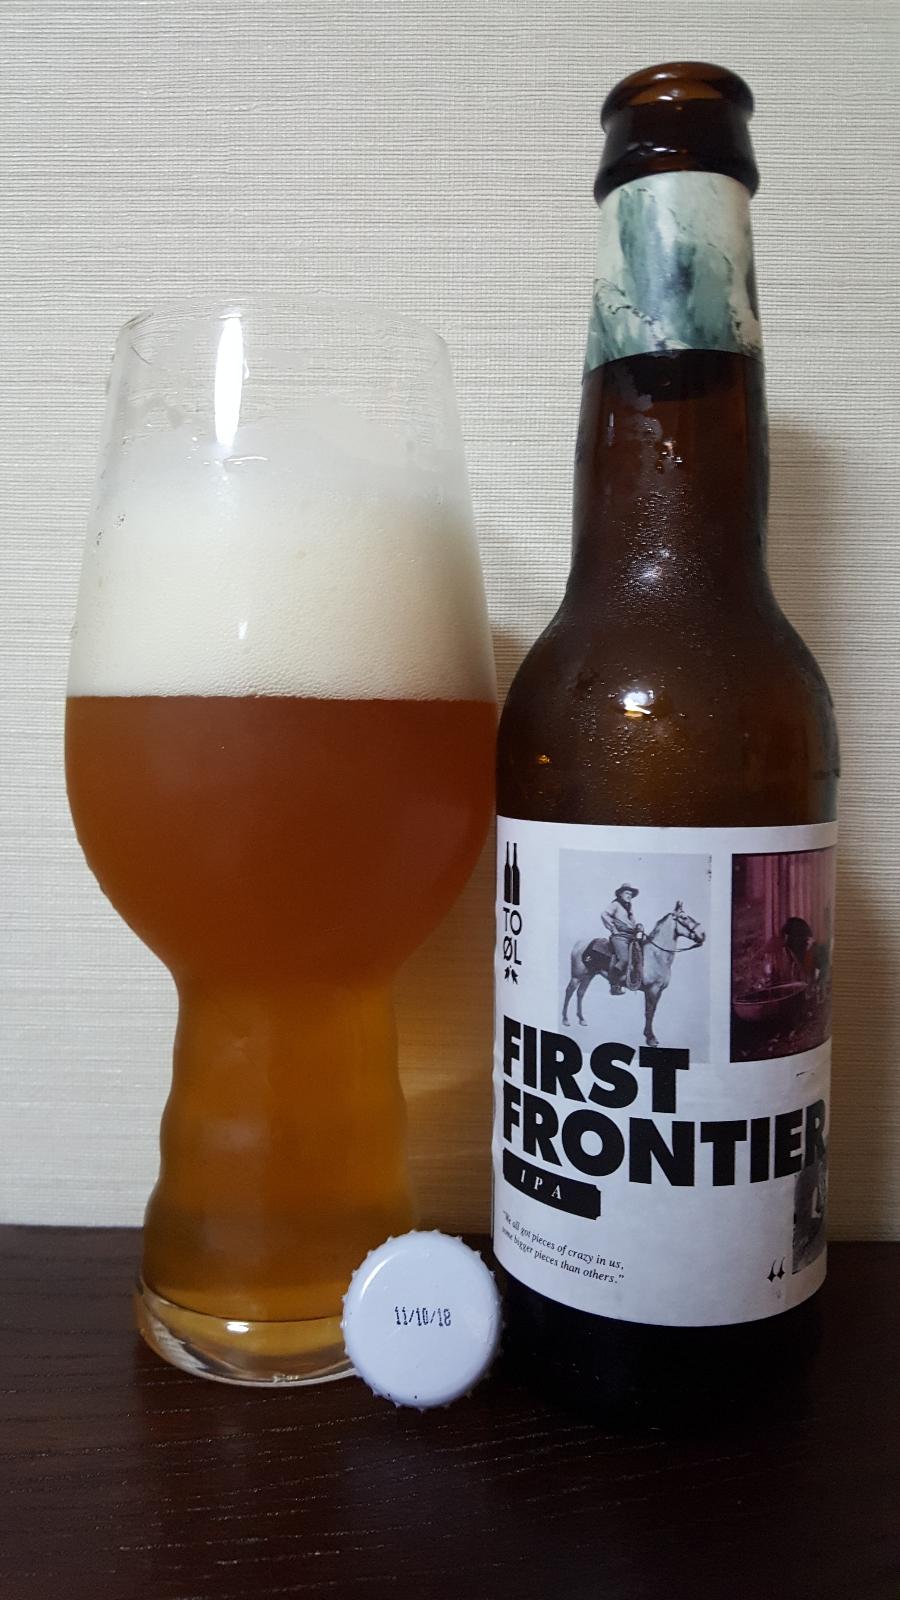 First Frontier IPA